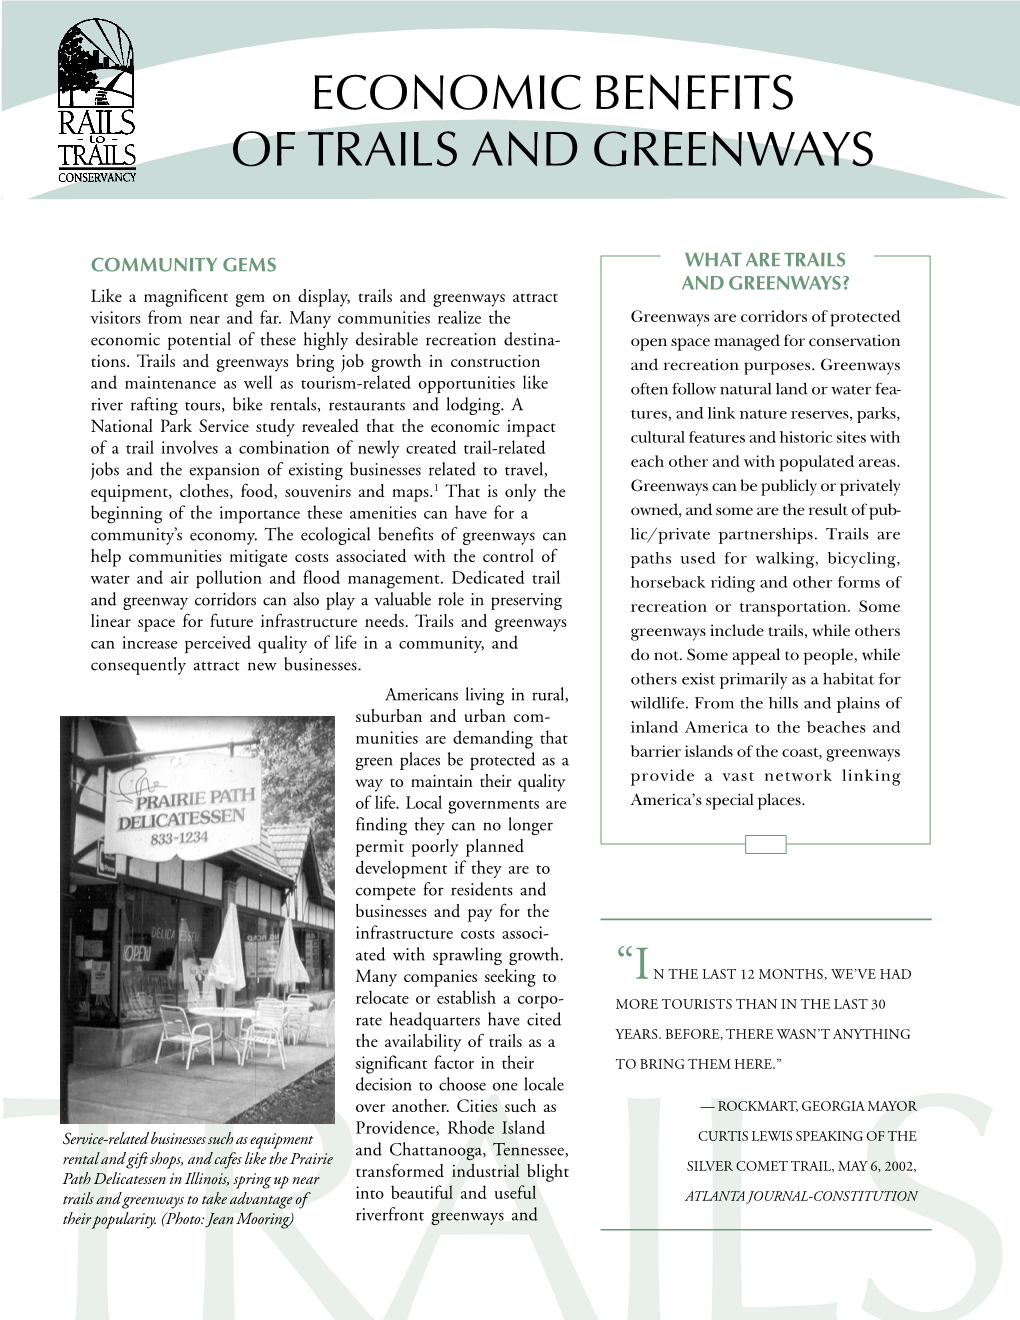 Economic Benefits of Trails and Greenways